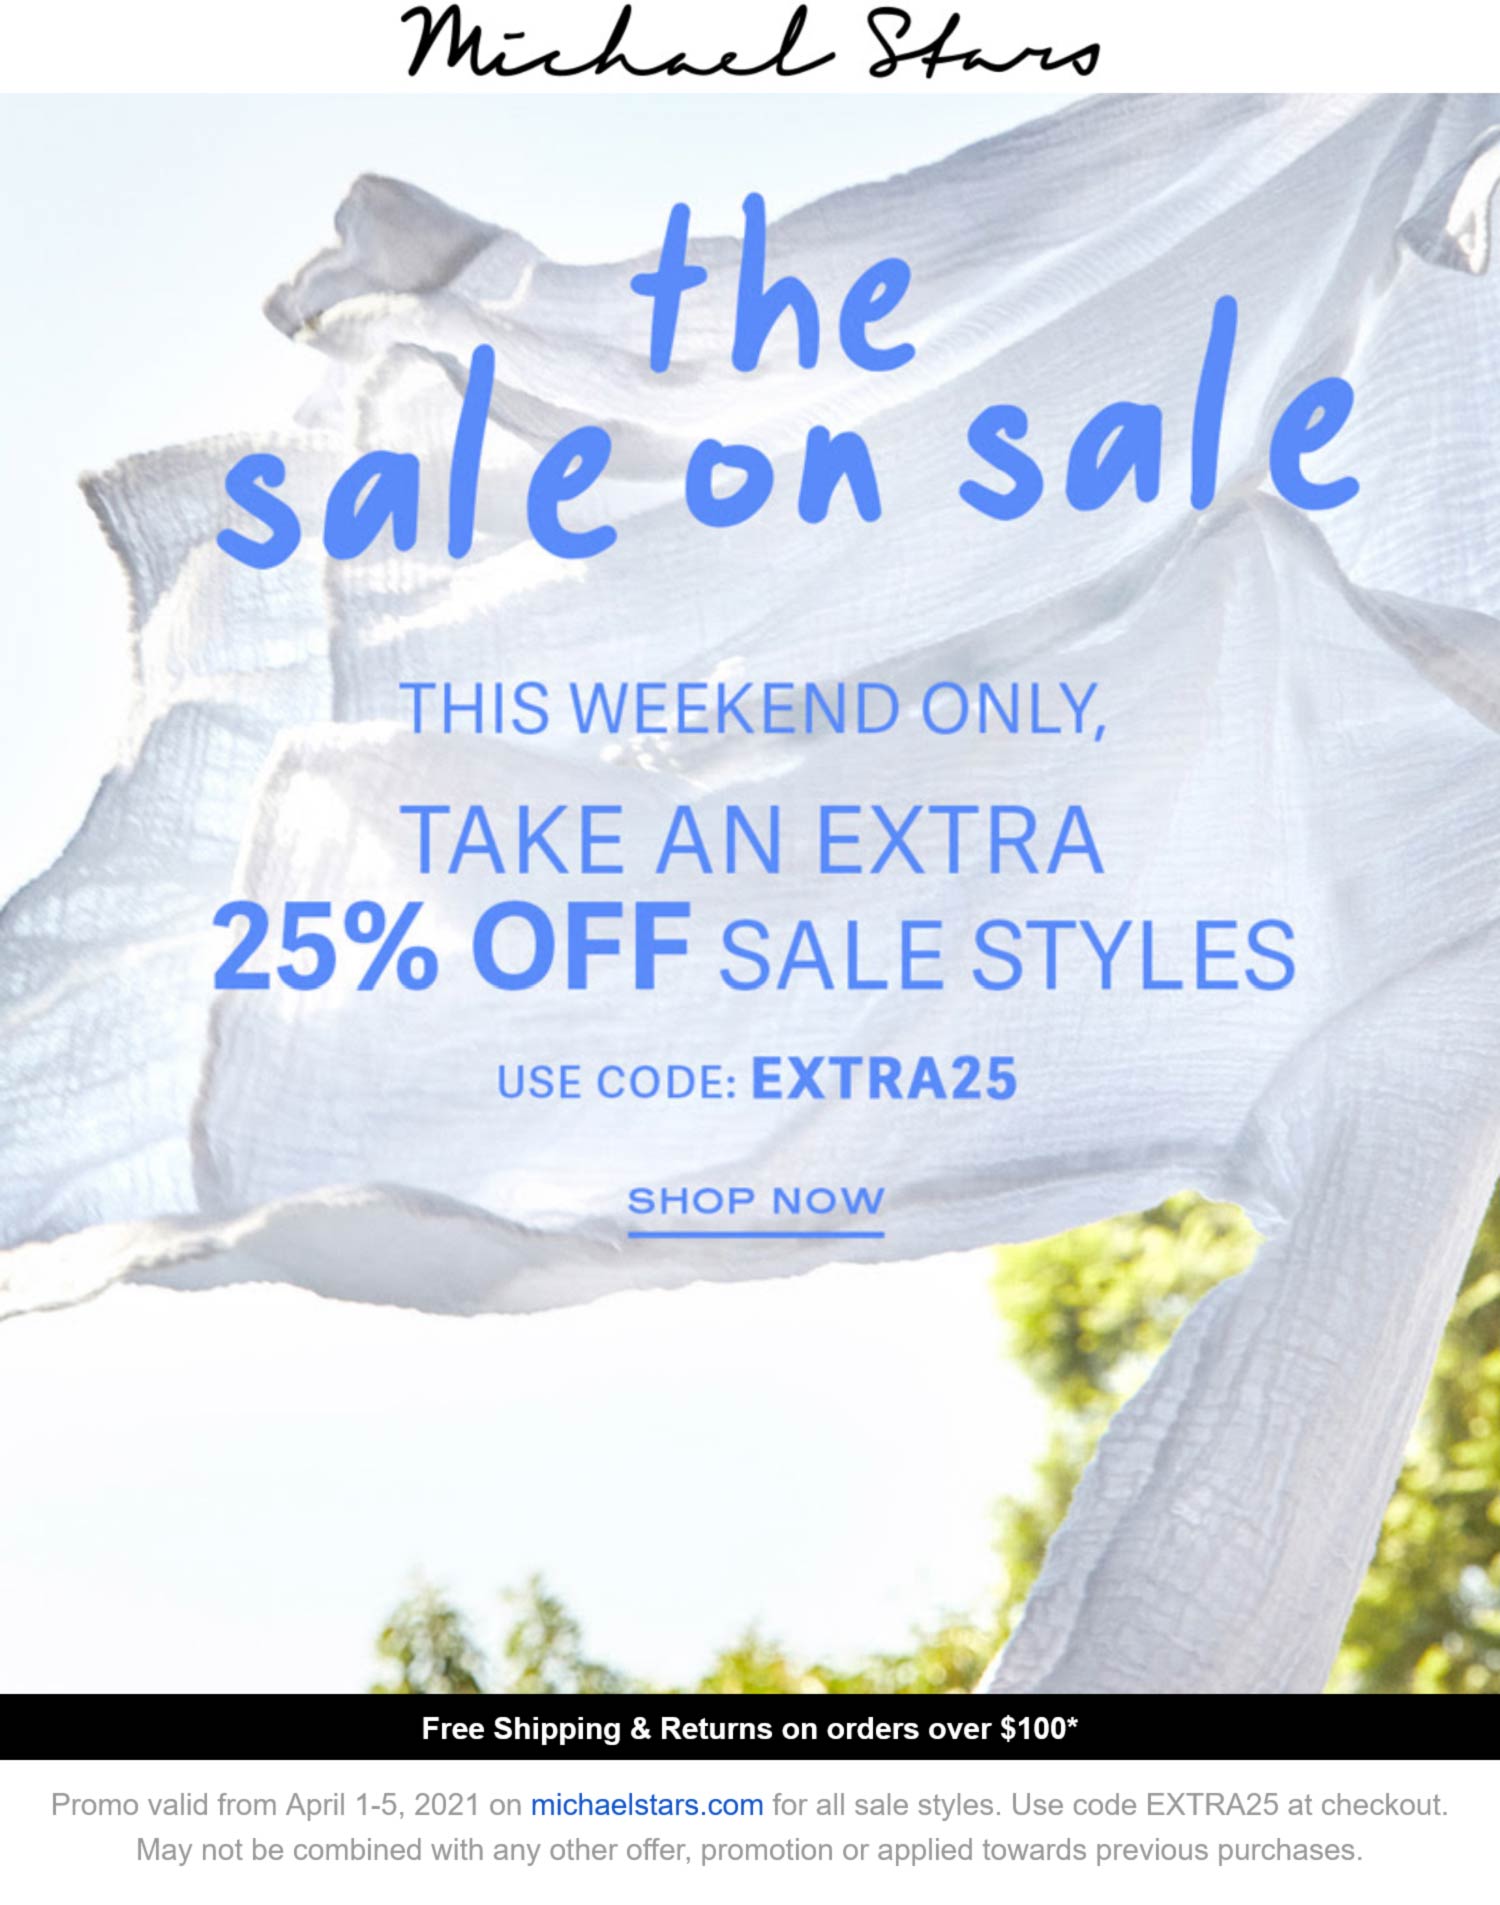 Michael Stars stores Coupon  Extra 25% off sale items online at Michael Stars via promo code EXTRA25 #michaelstars 